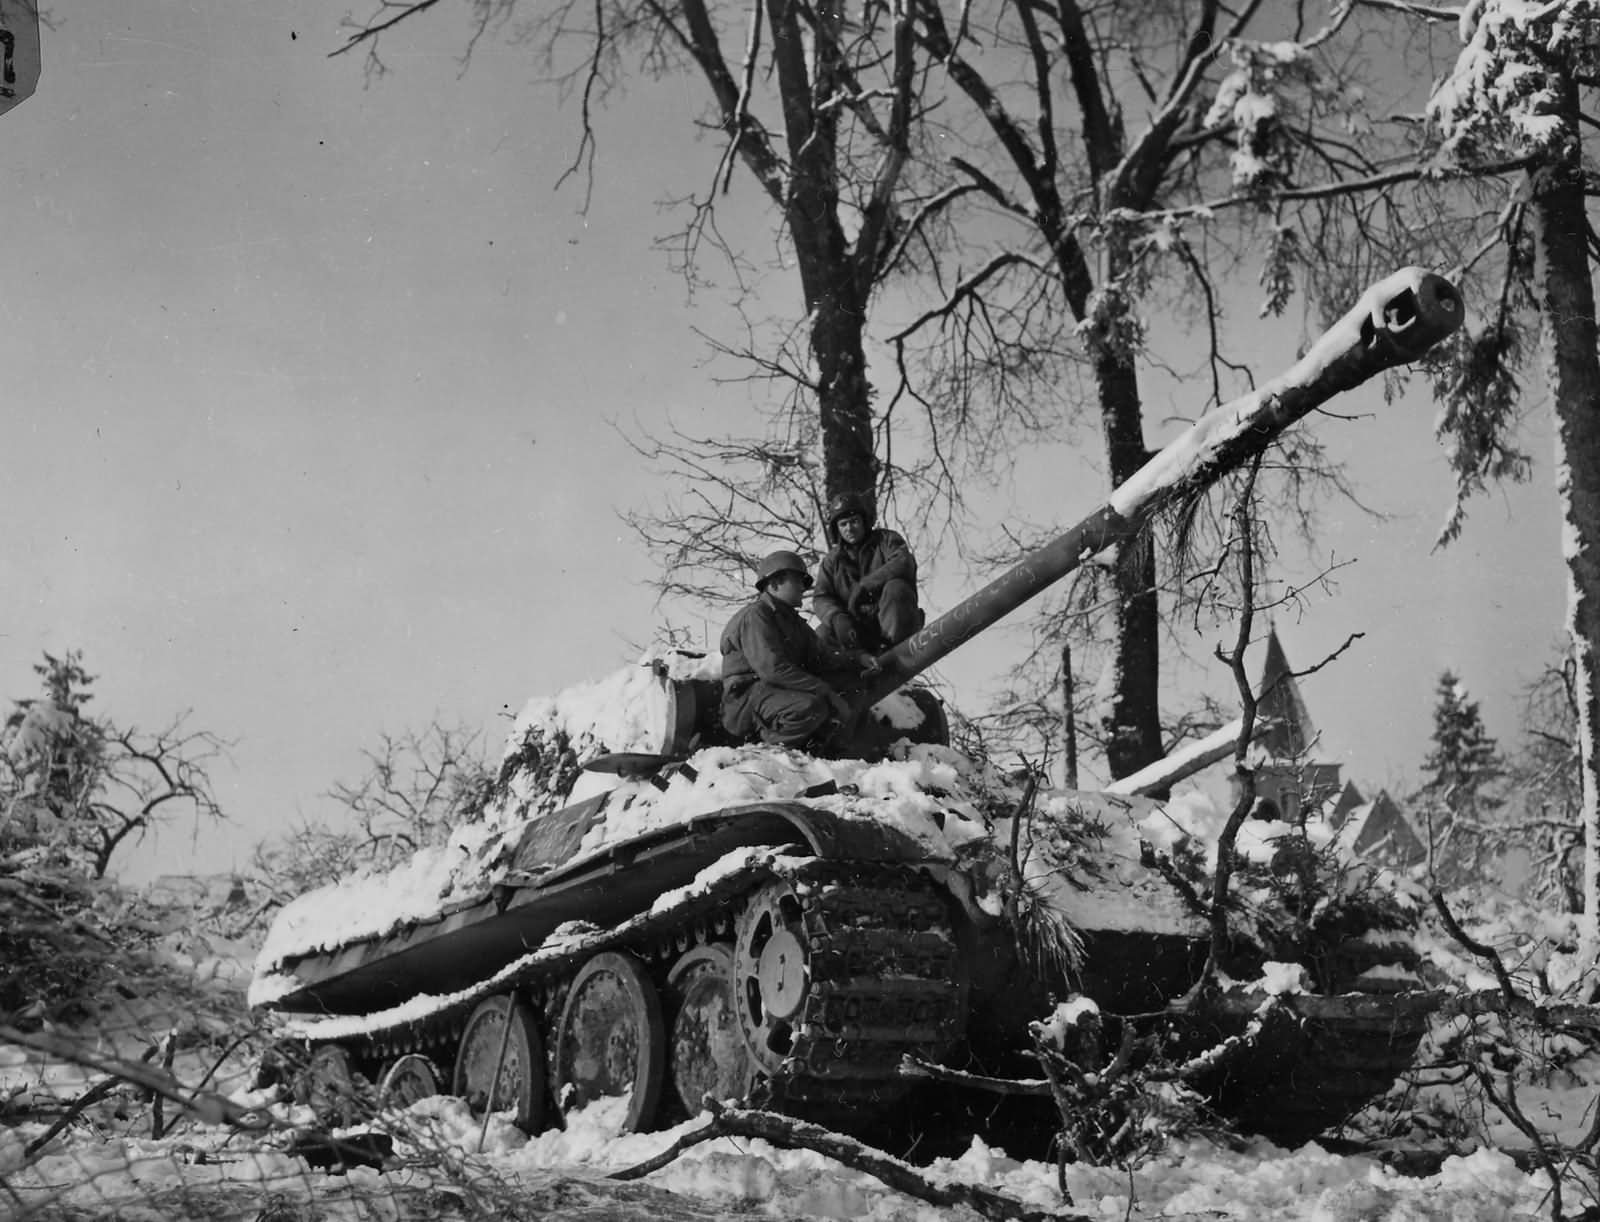 2nd Armored Division soldiers with captured Panther tank Grandmenil Belgium 1945